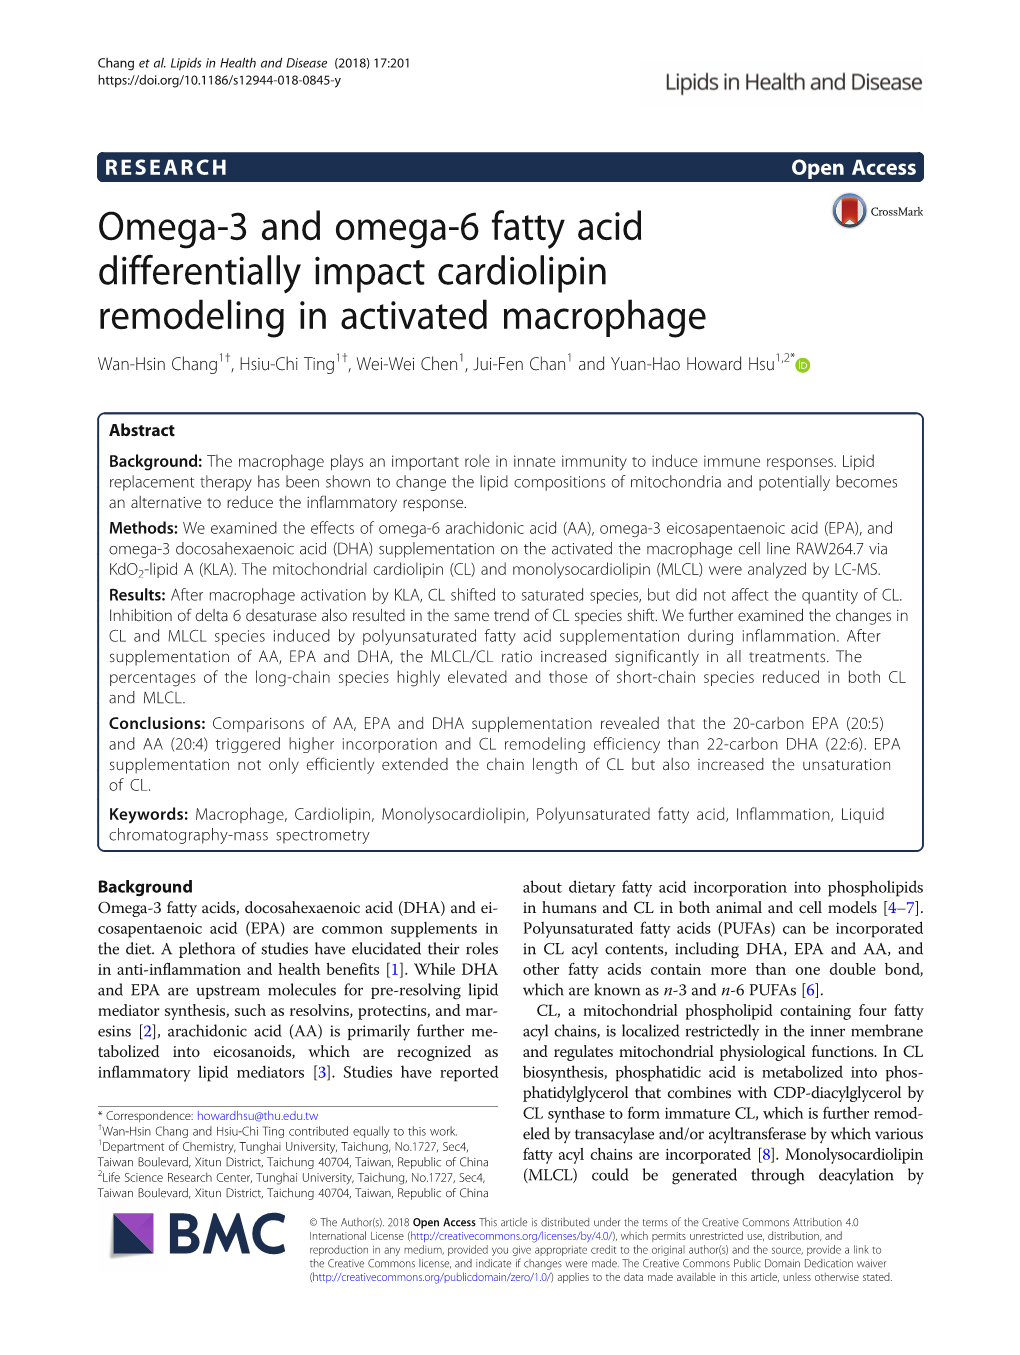 Omega-3 and Omega-6 Fatty Acid Differentially Impact Cardiolipin